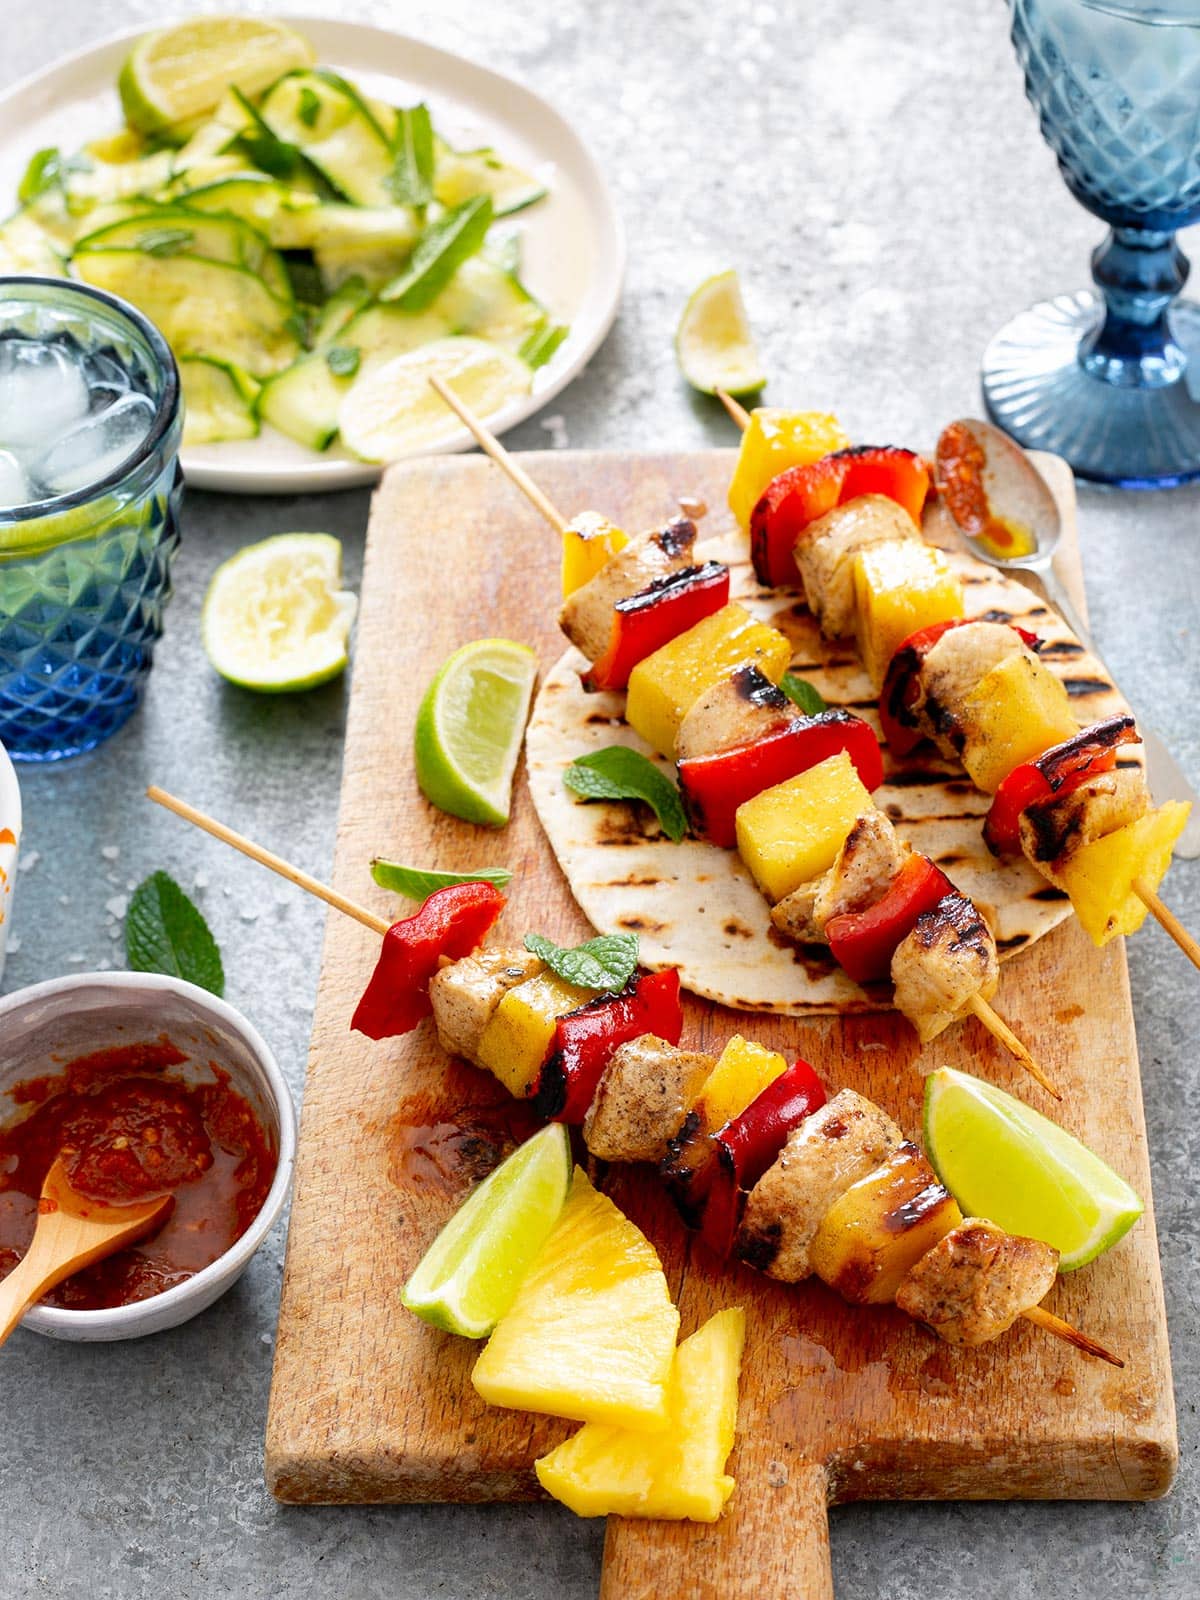 Brochetas de pollo on a wooden board with tortillas, lime wedges, salsa, and salad on the side.